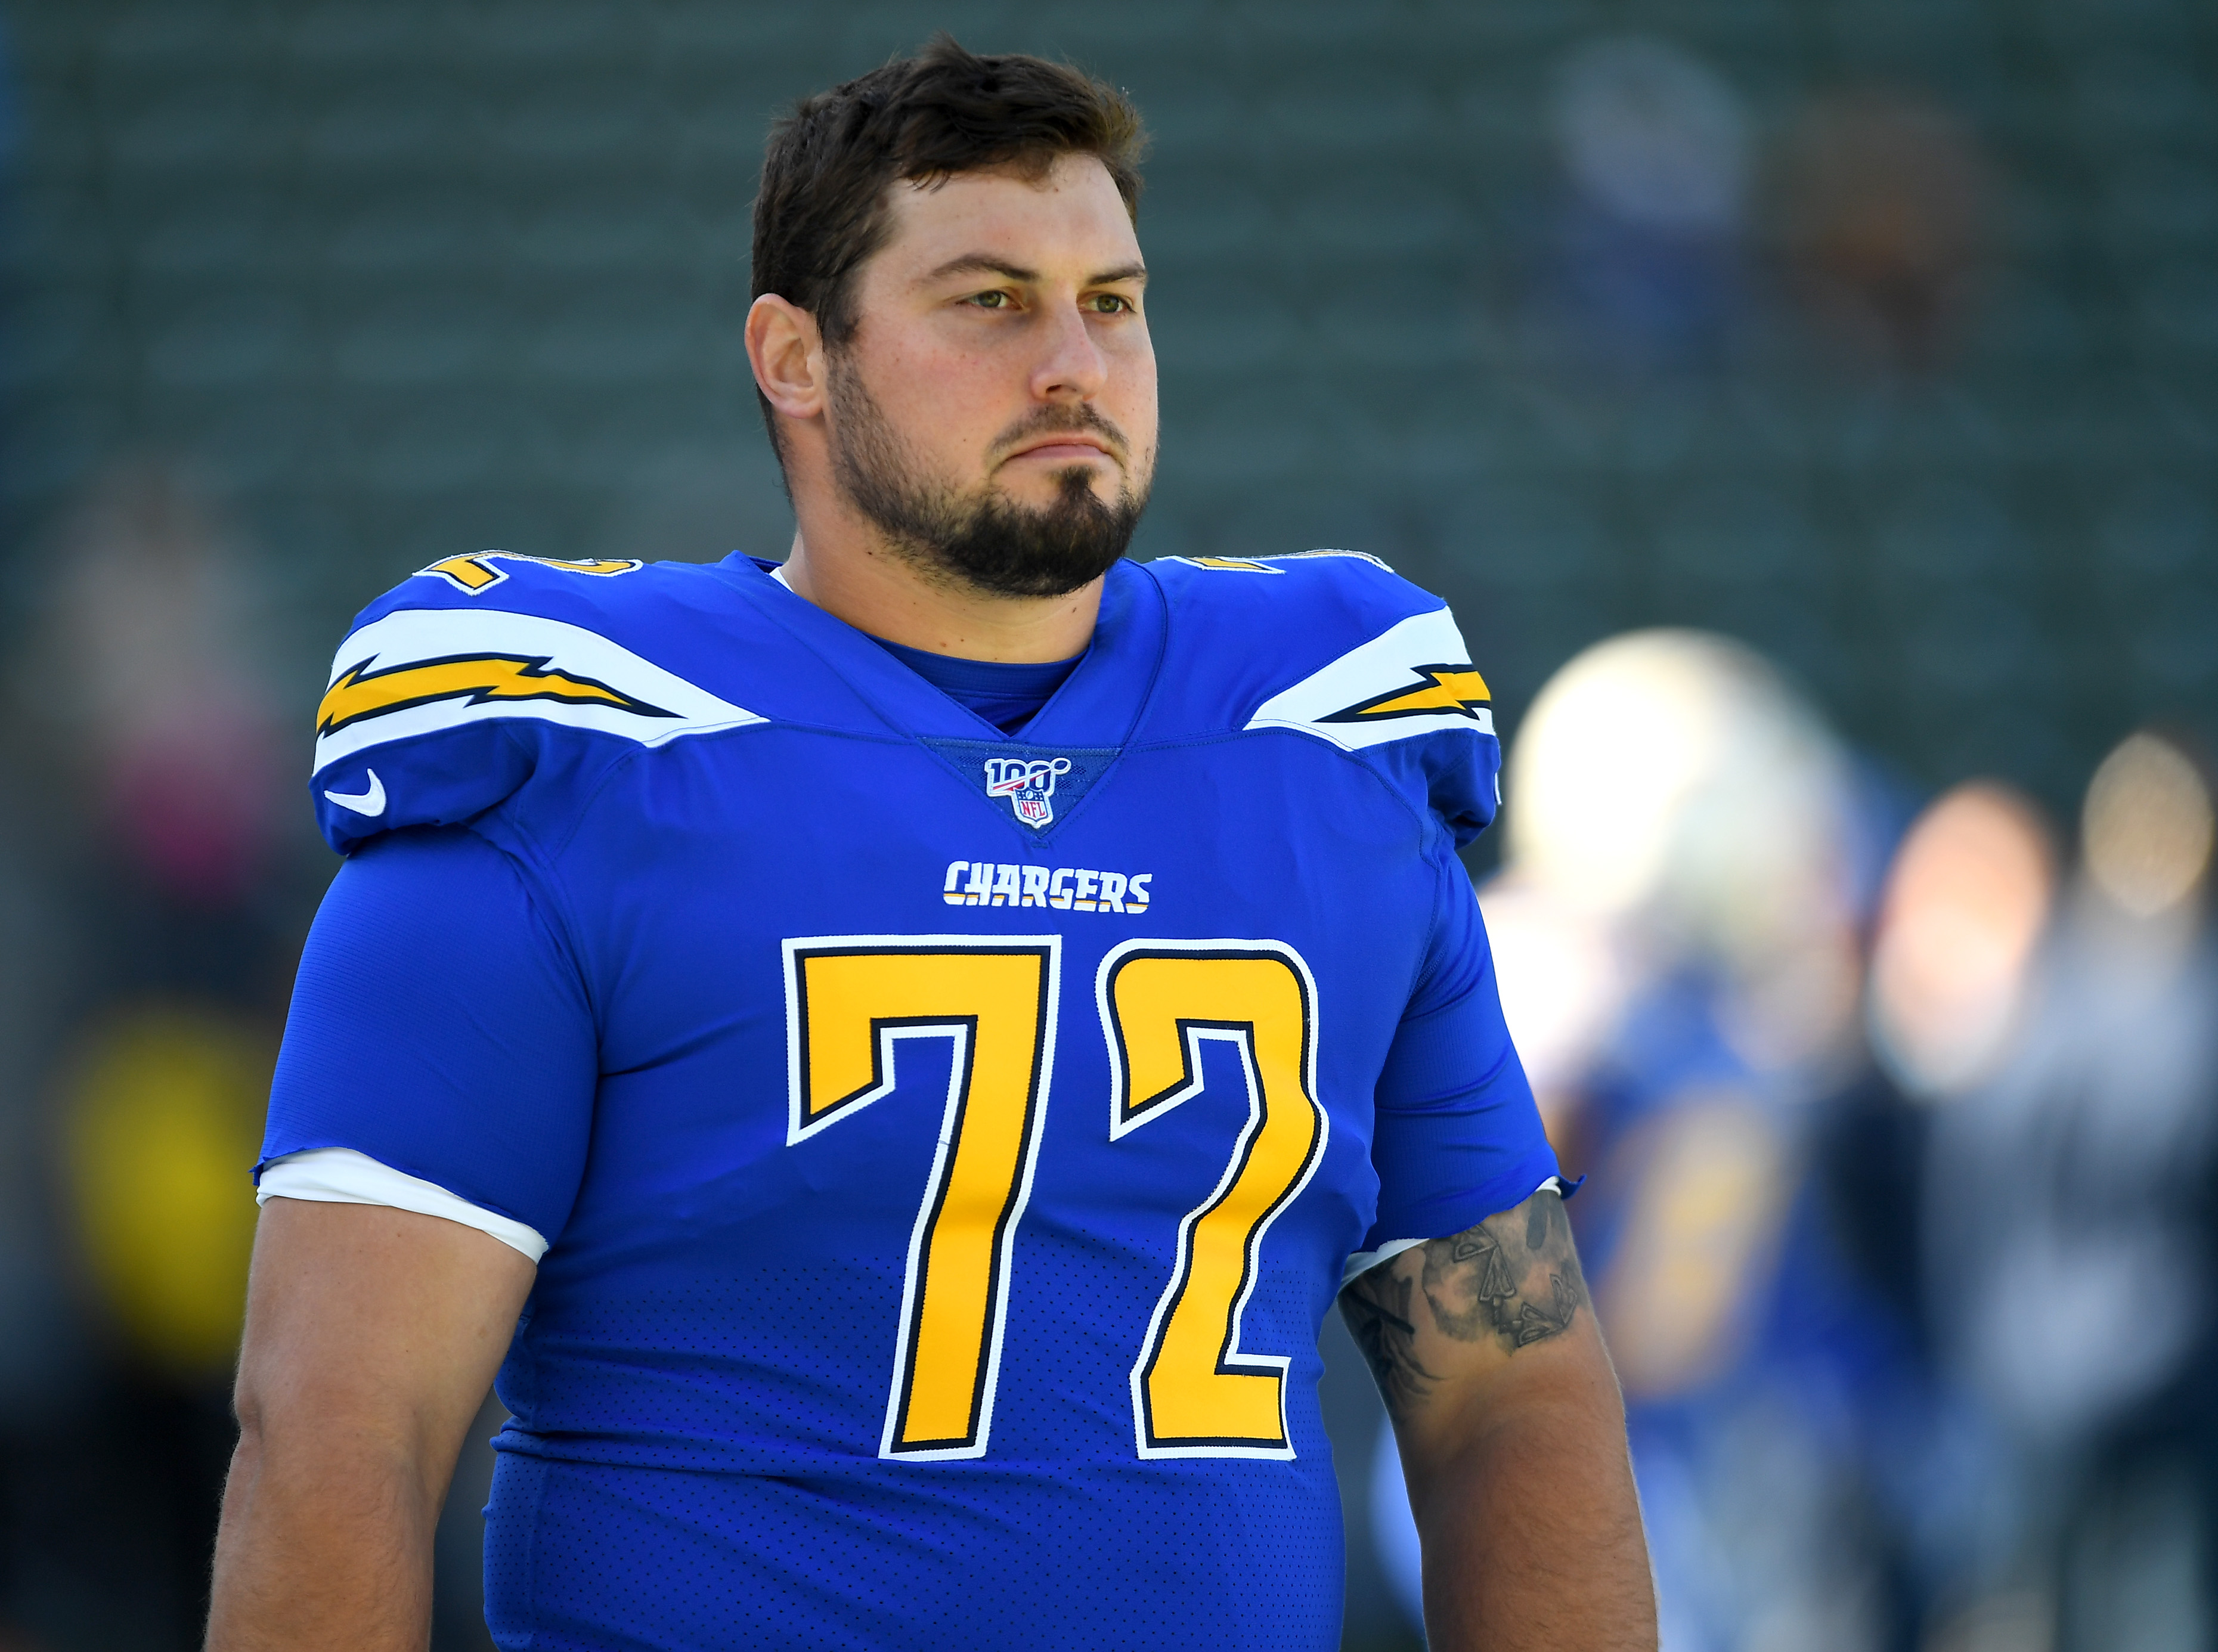 Chargers Re-Sign Offensive Lineman Ryan 